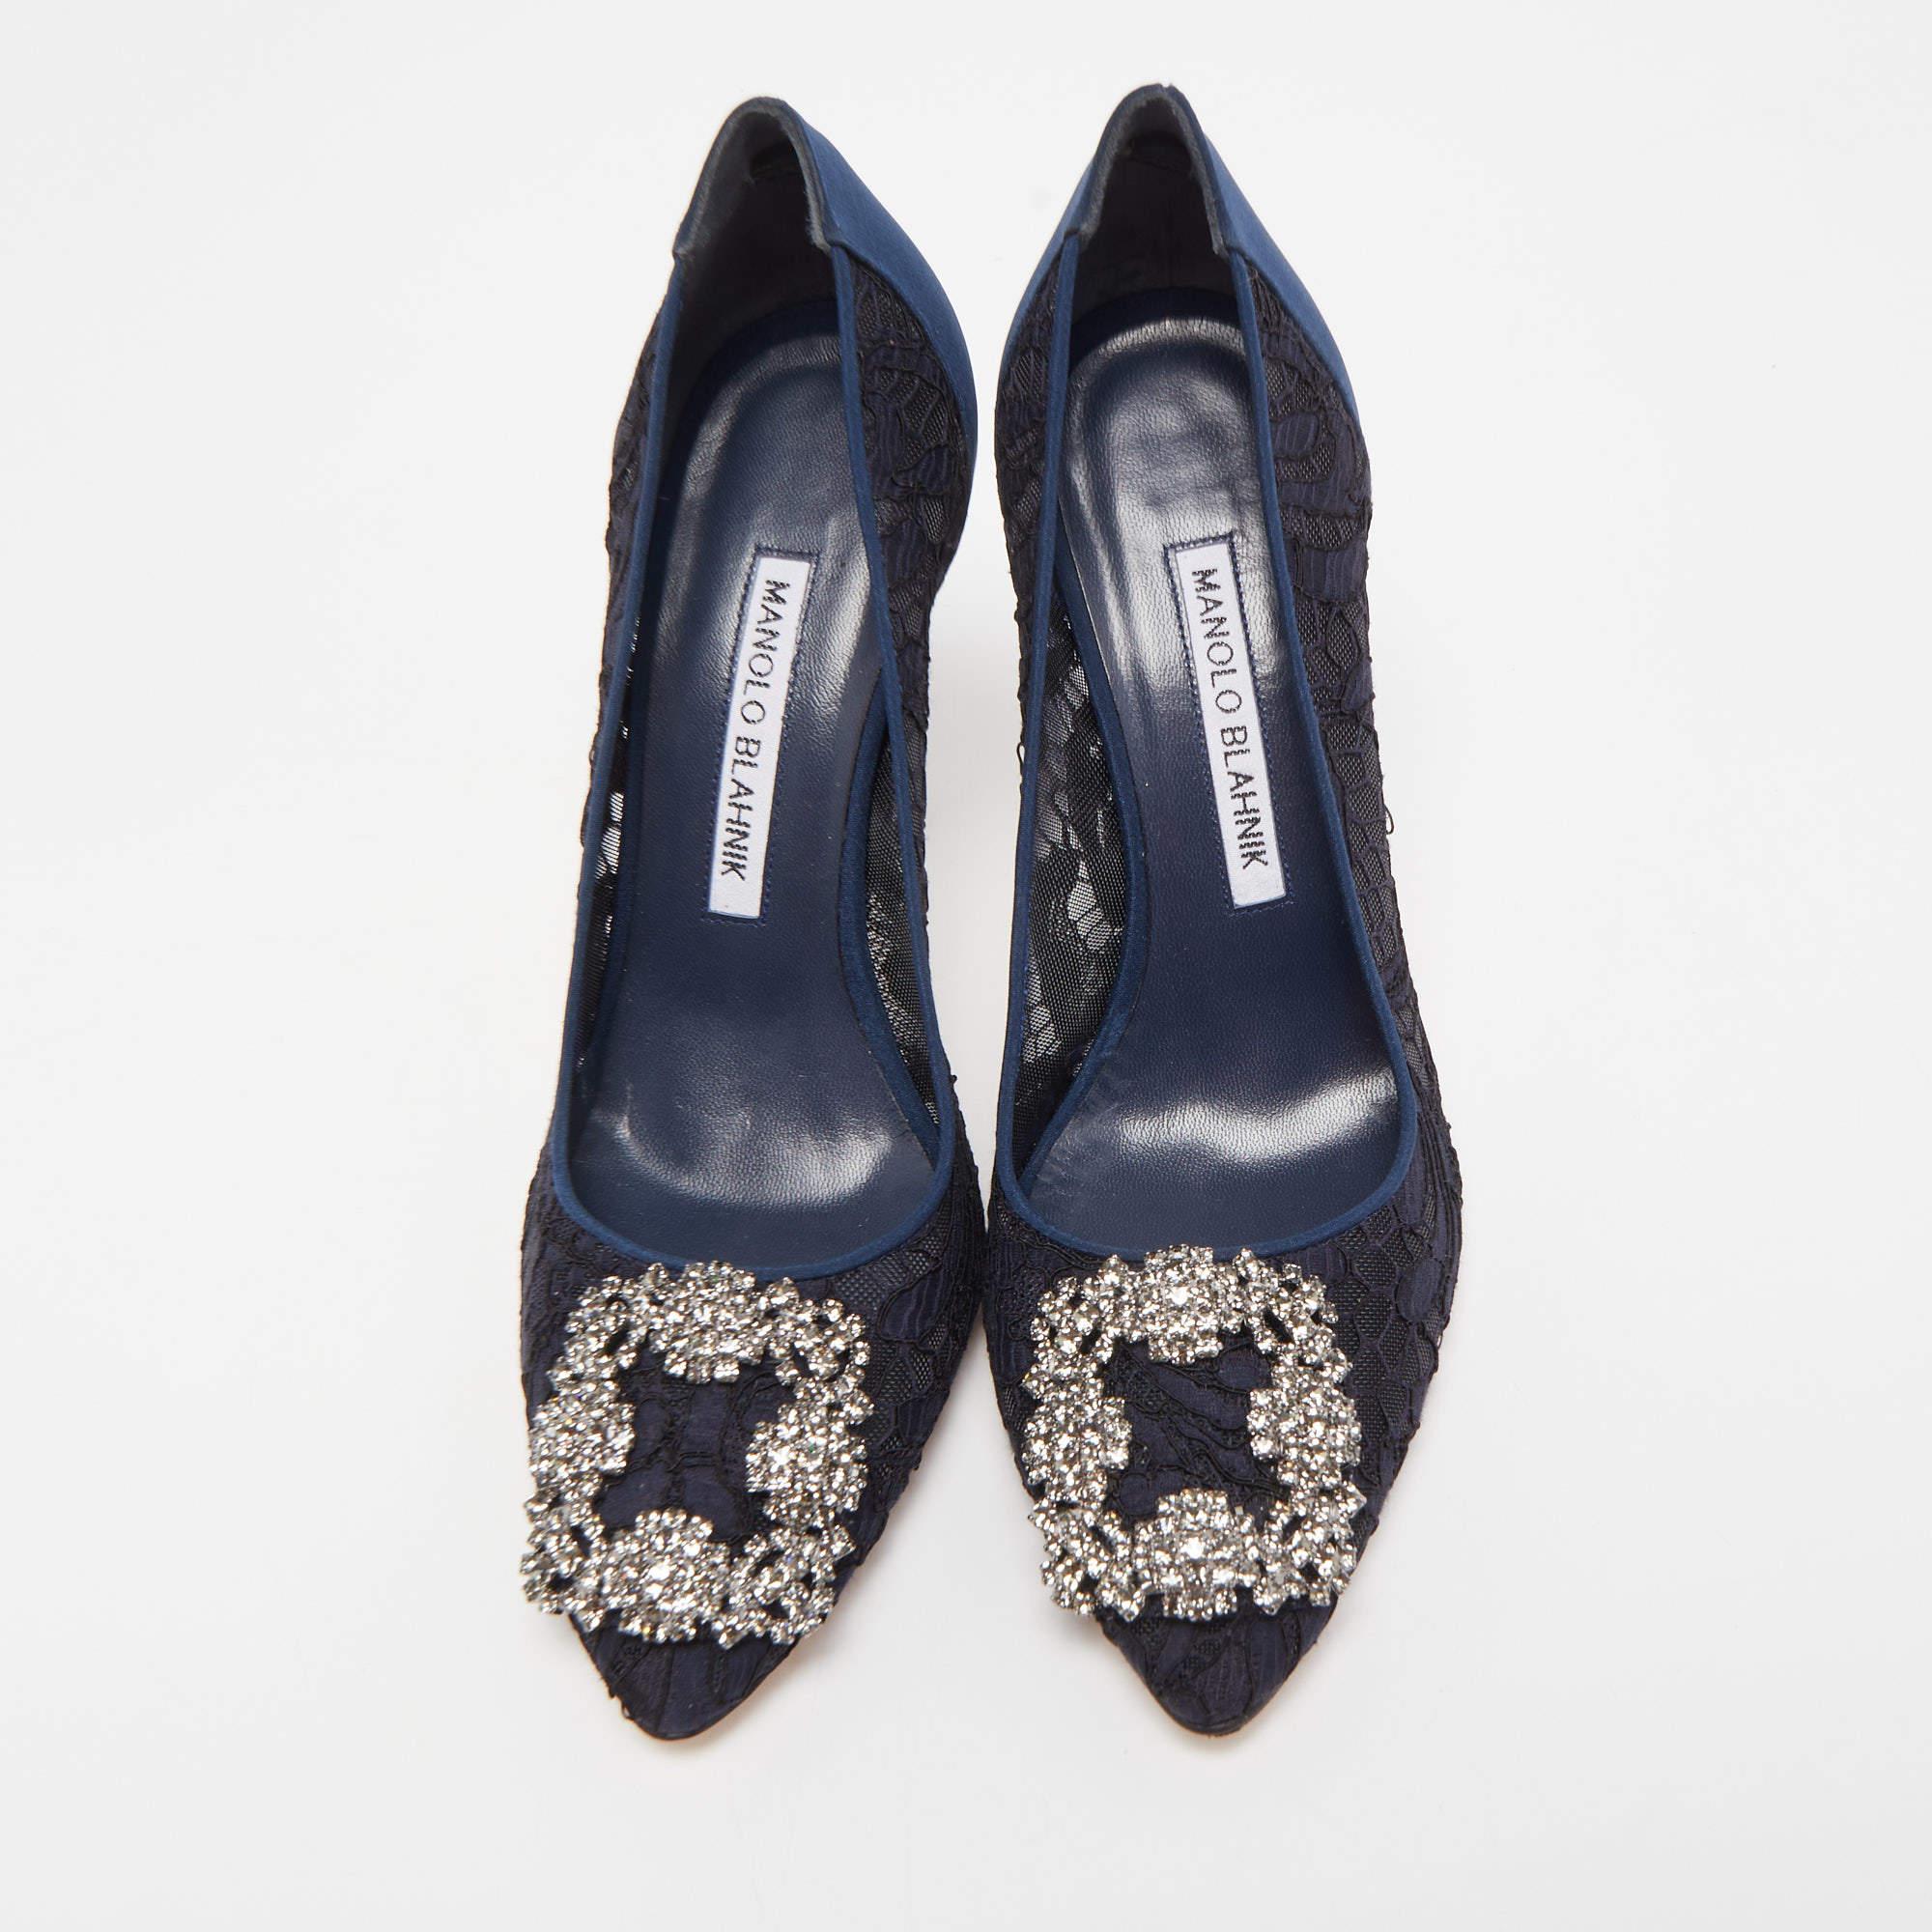 Manolo Blahnik is well-known for his graceful designs, and his label is synonymous with opulence, femininity, and elegance. These Hangisi pumps are shaped into a pointed-toe silhouette augmented by the embellishments perched on the uppers. They are